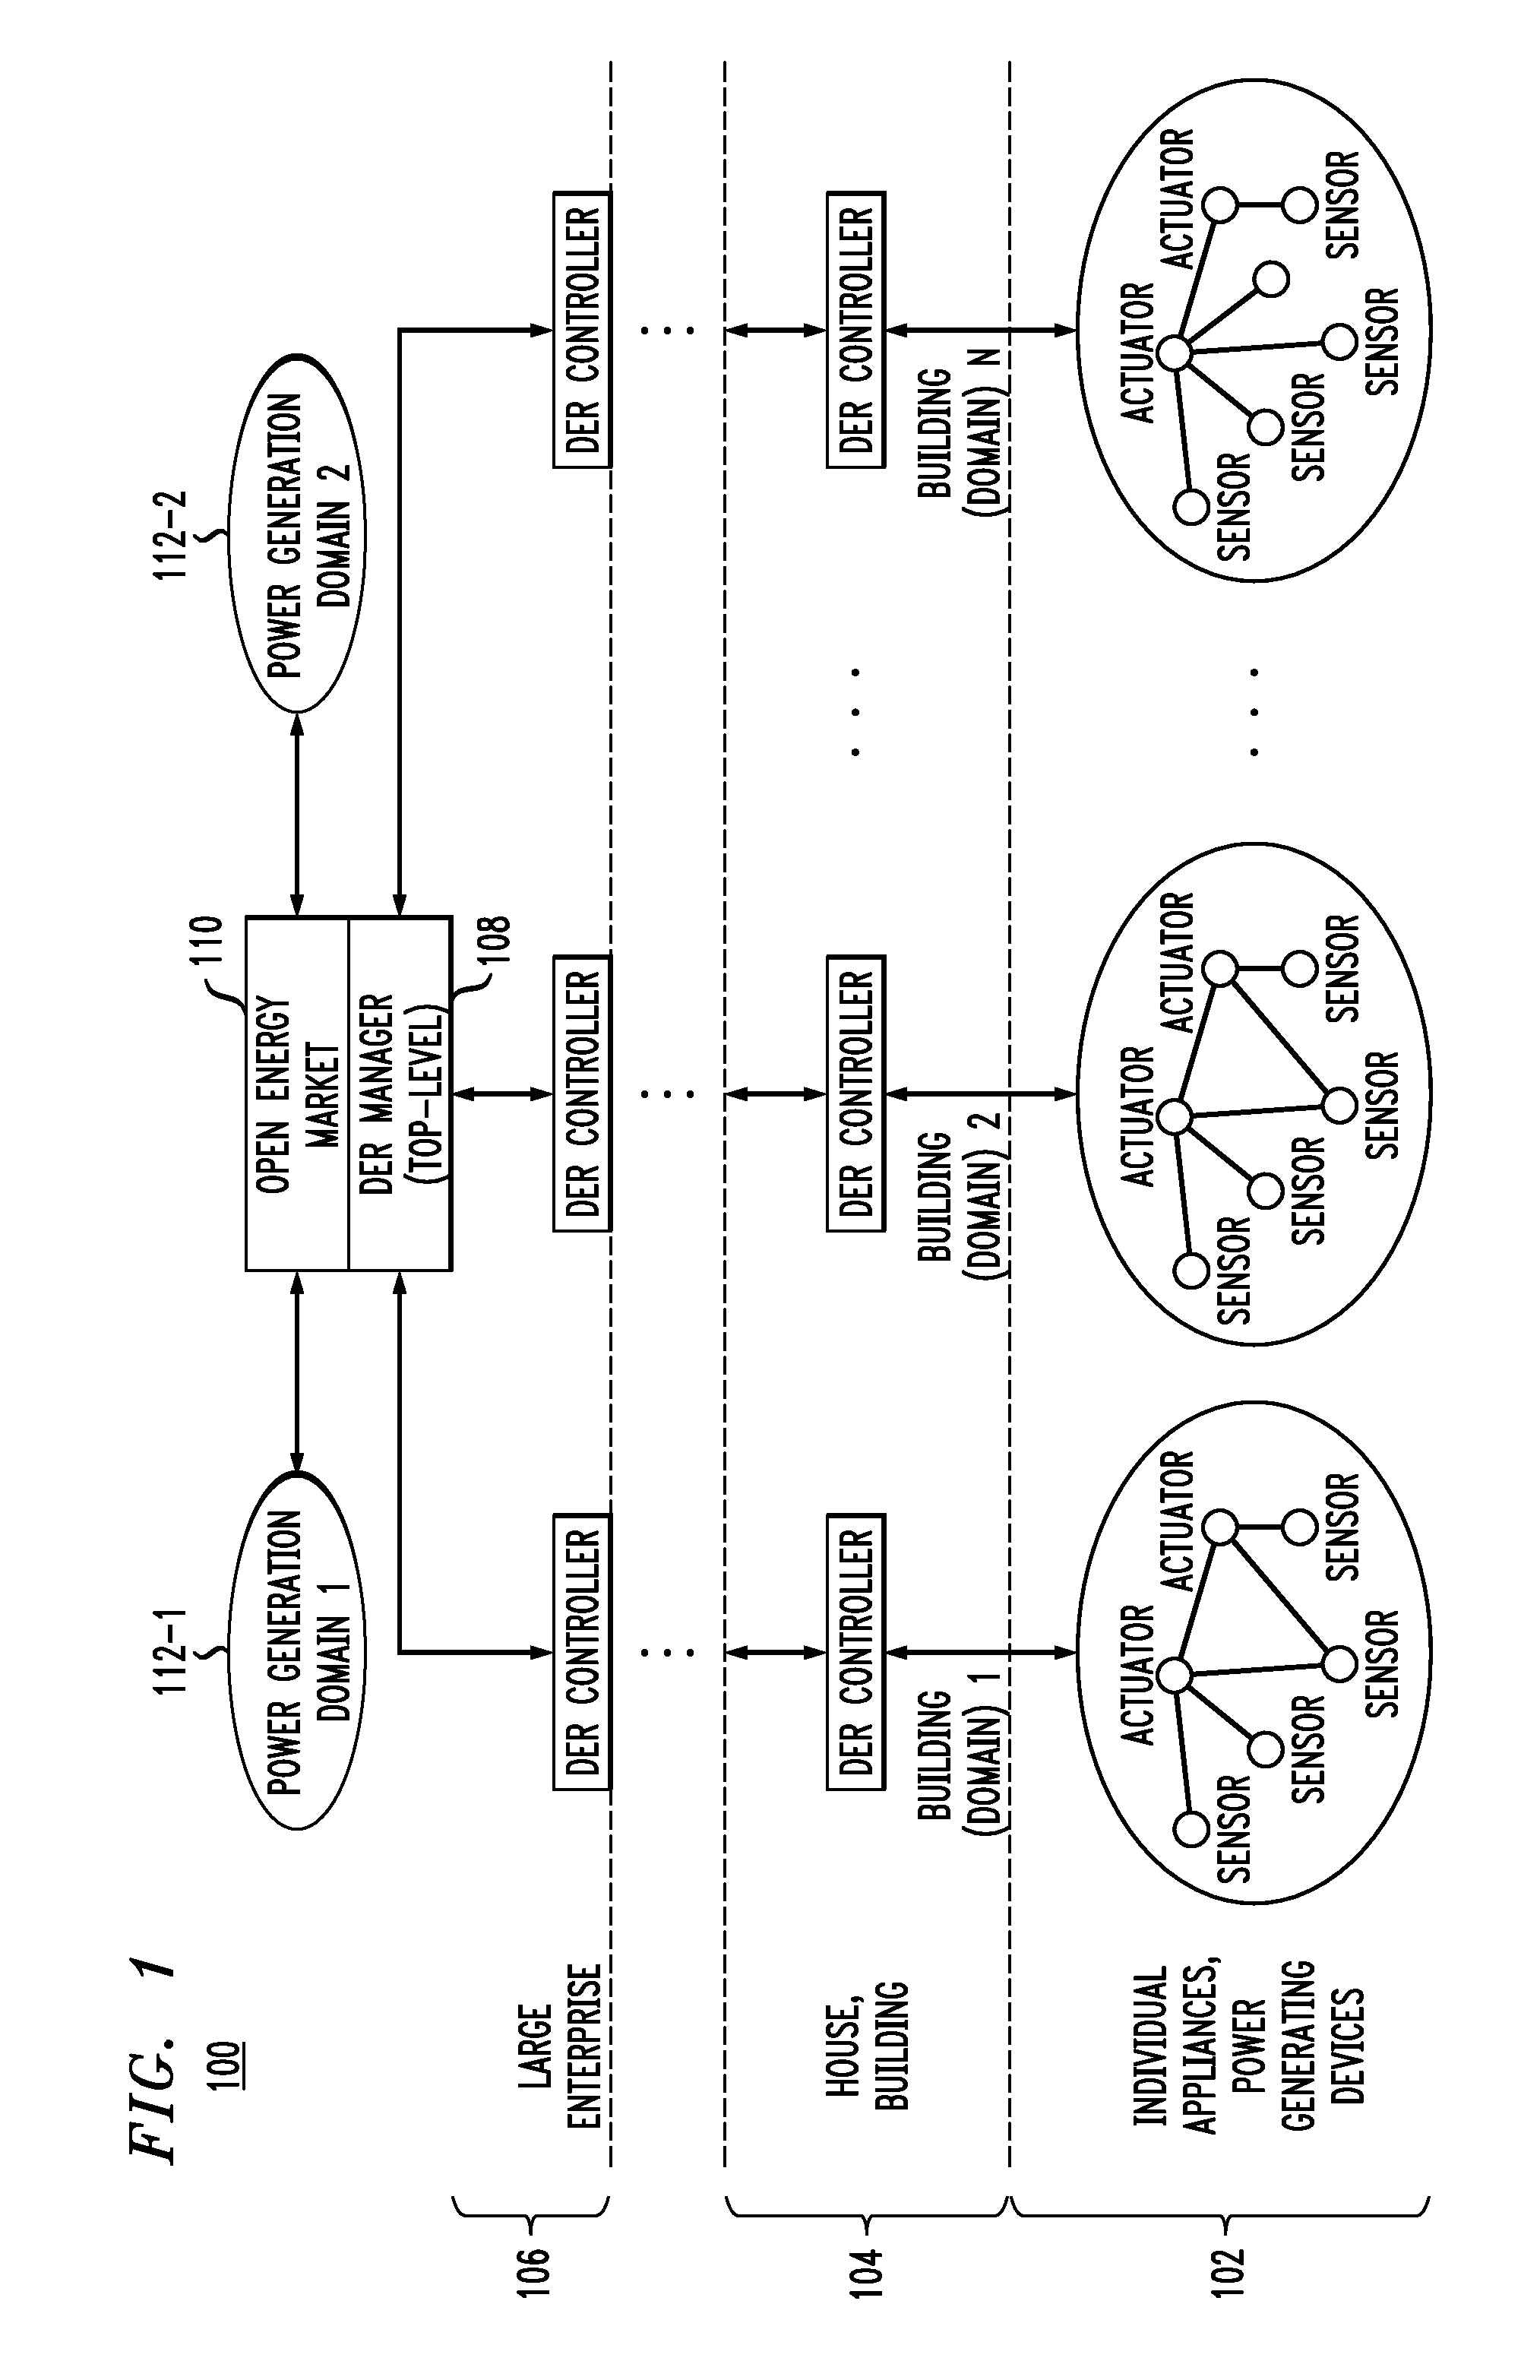 Method and System for Efficient Energy Distribution in Electrical Grids Using Sensor and Actuator Networks